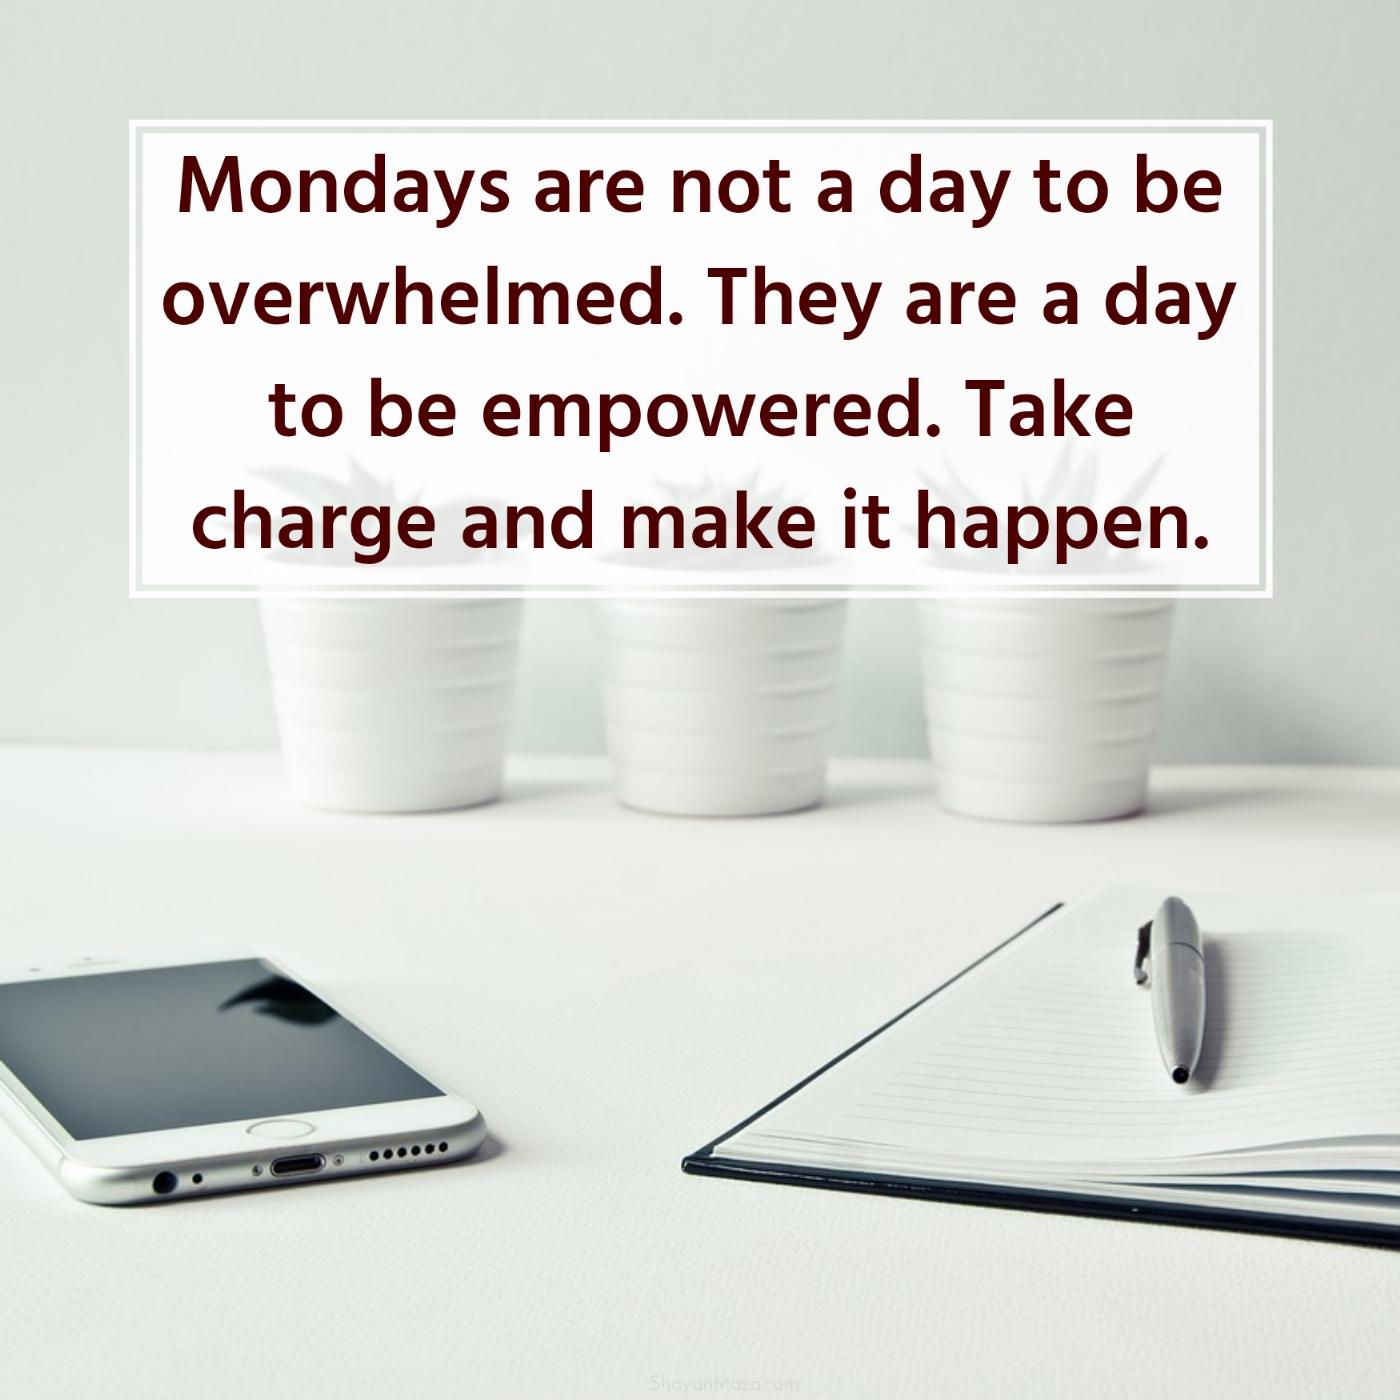 Mondays are not a day to be overwhelmed